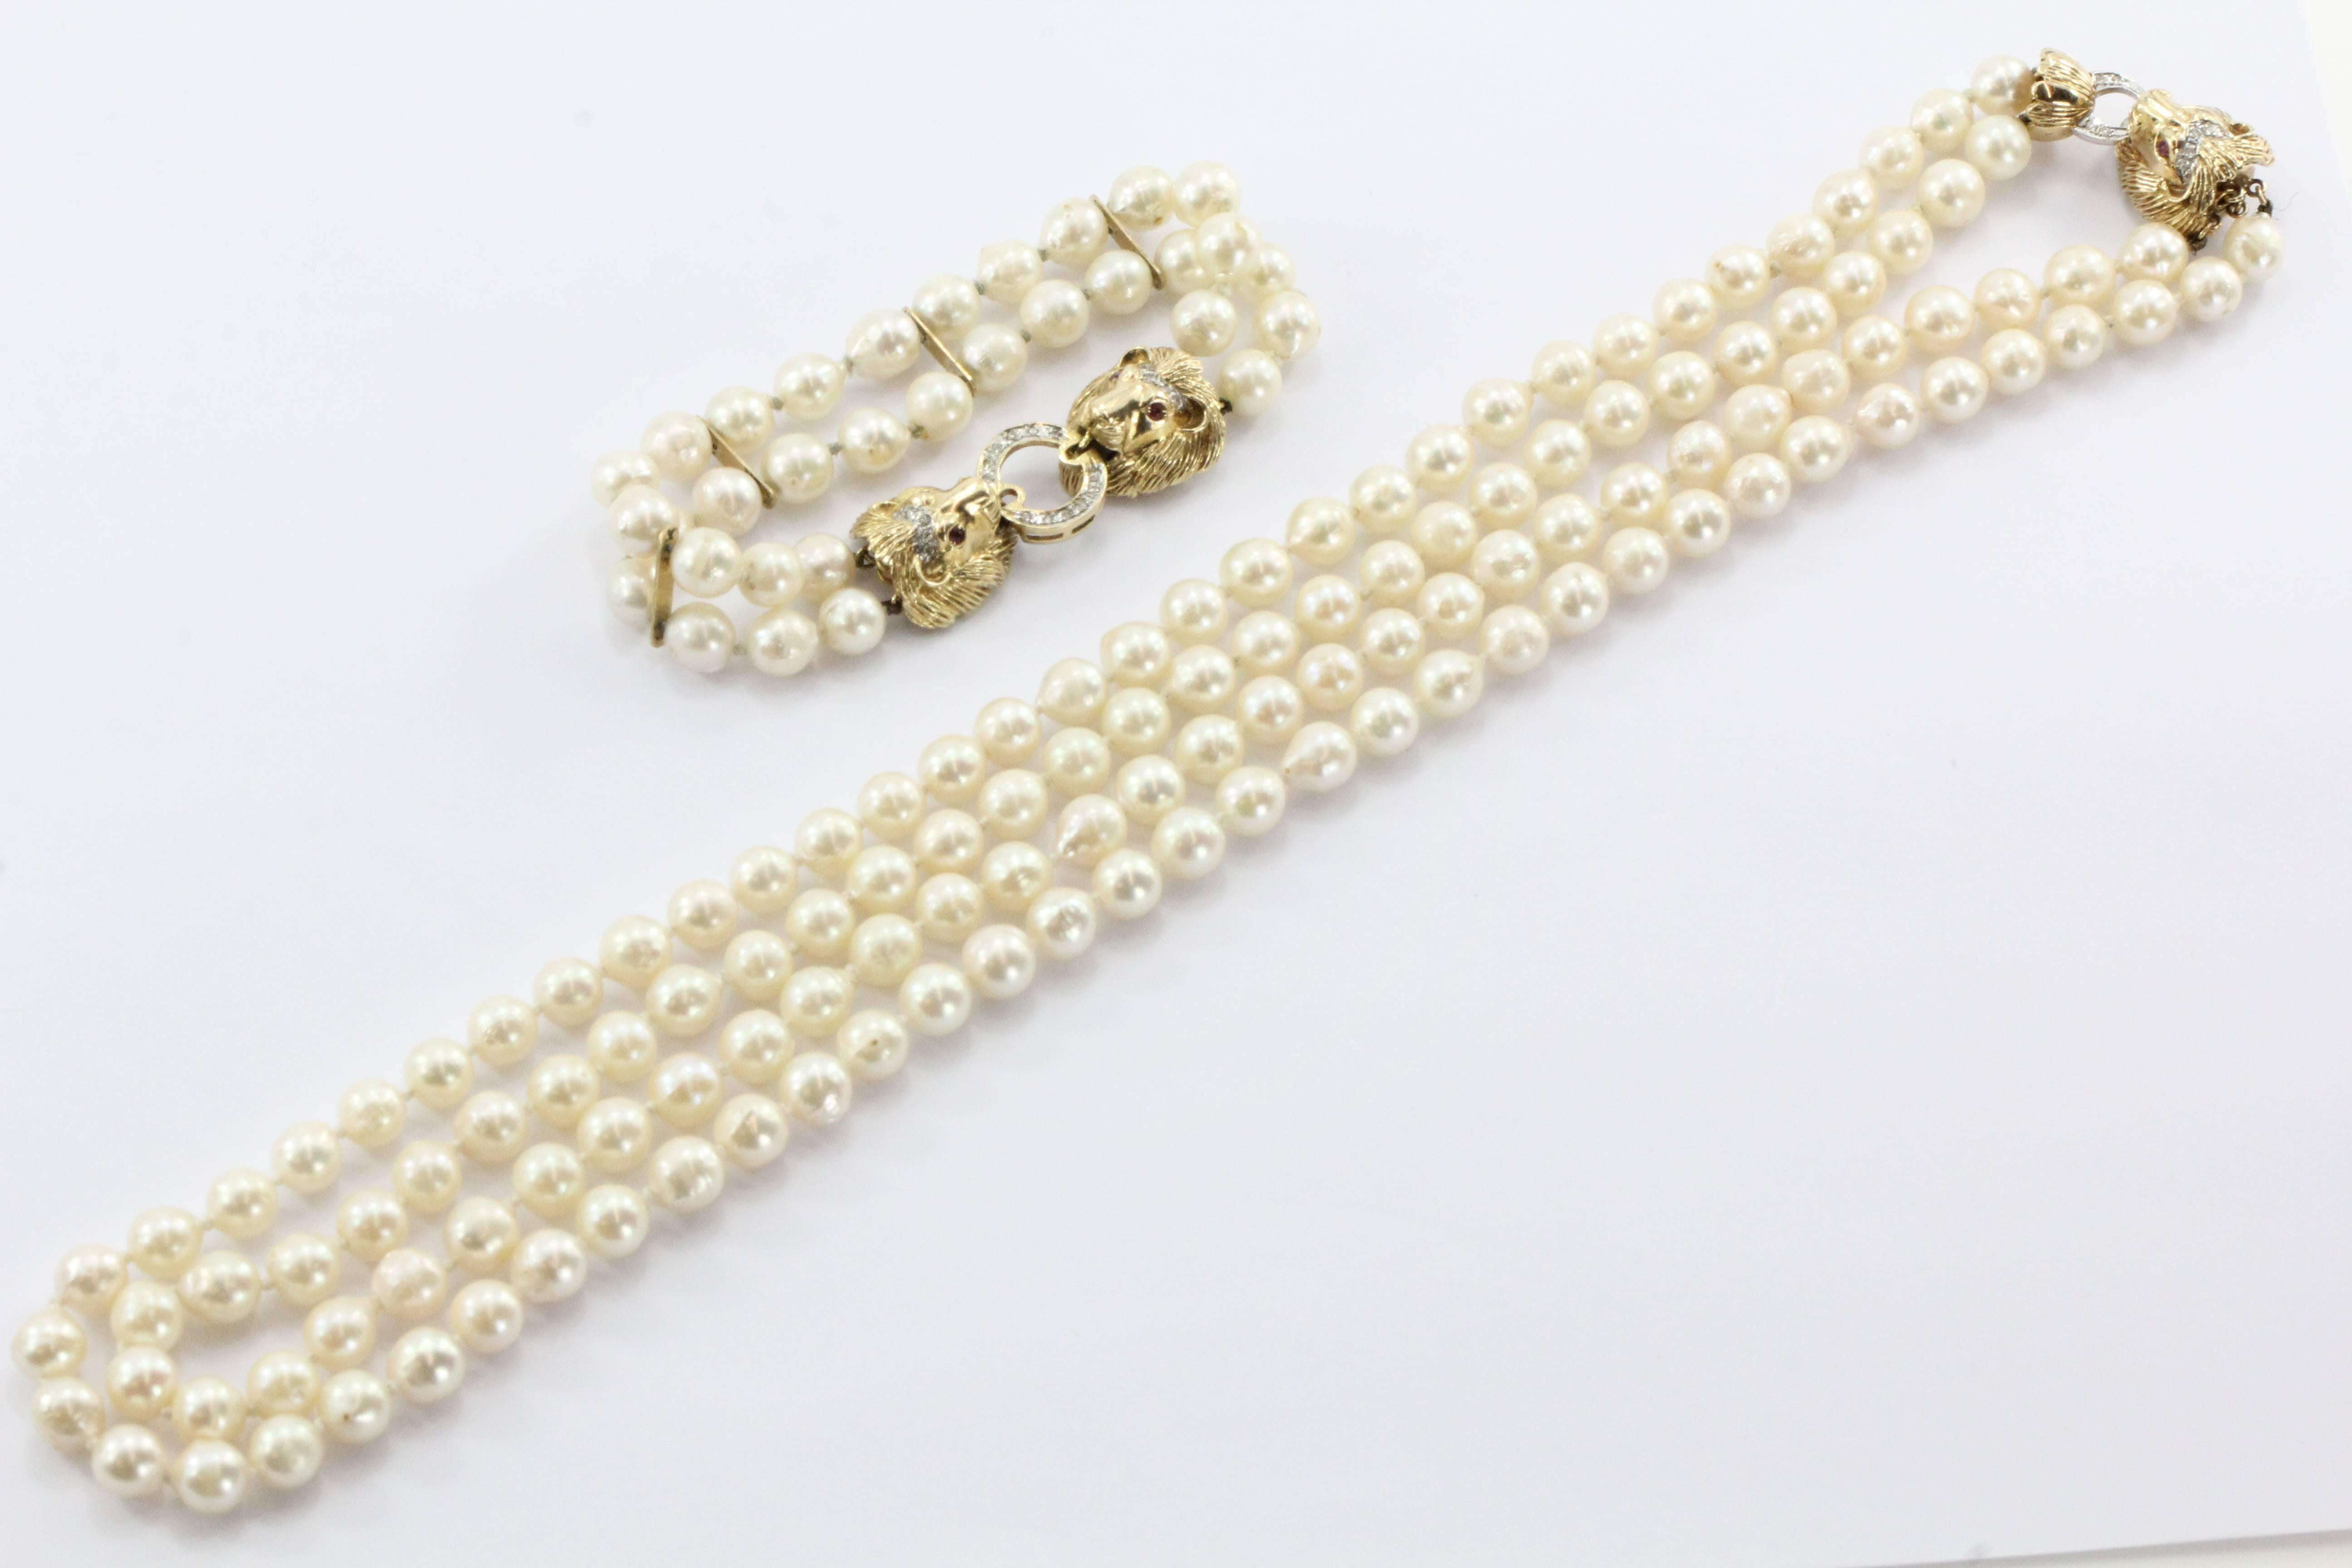 Antique 14K Gold Diamond Ruby Lion Head Double Strand Pearl Necklace & Bracelet Set. The set is in great antique estate condition and ready to wear. A few of the pearls are damaged with cracked nacre. The pieces are both hallmarked 585 14K. Both